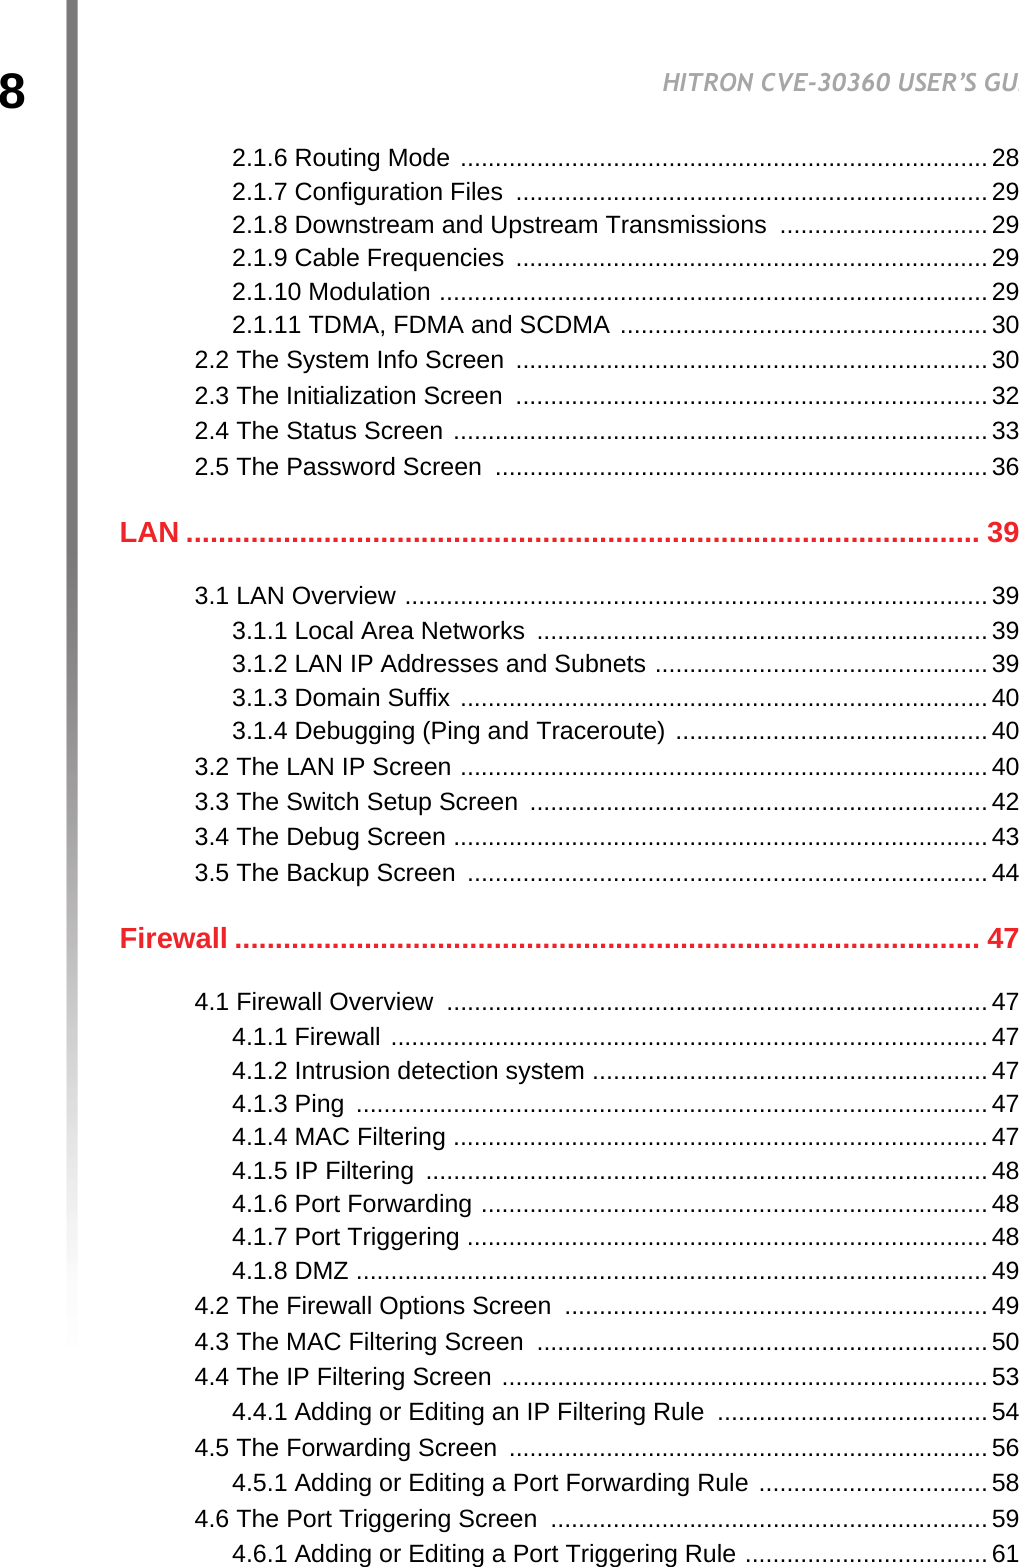 8HITRON CVE-30360 USER’S GUIDETABLE OF CONTENTS2.1.6 Routing Mode ............................................................................282.1.7 Configuration Files .................................................................... 292.1.8 Downstream and Upstream Transmissions .............................. 292.1.9 Cable Frequencies  .................................................................... 292.1.10 Modulation ............................................................................... 292.1.11 TDMA, FDMA and SCDMA .....................................................302.2 The System Info Screen  .................................................................... 302.3 The Initialization Screen  .................................................................... 322.4 The Status Screen ............................................................................. 332.5 The Password Screen  .......................................................................36LAN .................................................................................................. 393.1 LAN Overview .................................................................................... 393.1.1 Local Area Networks ................................................................. 393.1.2 LAN IP Addresses and Subnets ................................................393.1.3 Domain Suffix ............................................................................403.1.4 Debugging (Ping and Traceroute) ............................................. 403.2 The LAN IP Screen ............................................................................403.3 The Switch Setup Screen  .................................................................. 423.4 The Debug Screen ............................................................................. 433.5 The Backup Screen  ........................................................................... 44Firewall ............................................................................................ 474.1 Firewall Overview  .............................................................................. 474.1.1 Firewall ...................................................................................... 474.1.2 Intrusion detection system ......................................................... 474.1.3 Ping  ........................................................................................... 474.1.4 MAC Filtering ............................................................................. 474.1.5 IP Filtering  .................................................................................484.1.6 Port Forwarding ......................................................................... 484.1.7 Port Triggering ........................................................................... 484.1.8 DMZ ........................................................................................... 494.2 The Firewall Options Screen ............................................................. 494.3 The MAC Filtering Screen ................................................................. 504.4 The IP Filtering Screen ...................................................................... 534.4.1 Adding or Editing an IP Filtering Rule  .......................................544.5 The Forwarding Screen  .....................................................................564.5.1 Adding or Editing a Port Forwarding Rule ................................. 584.6 The Port Triggering Screen  ............................................................... 594.6.1 Adding or Editing a Port Triggering Rule ................................... 61